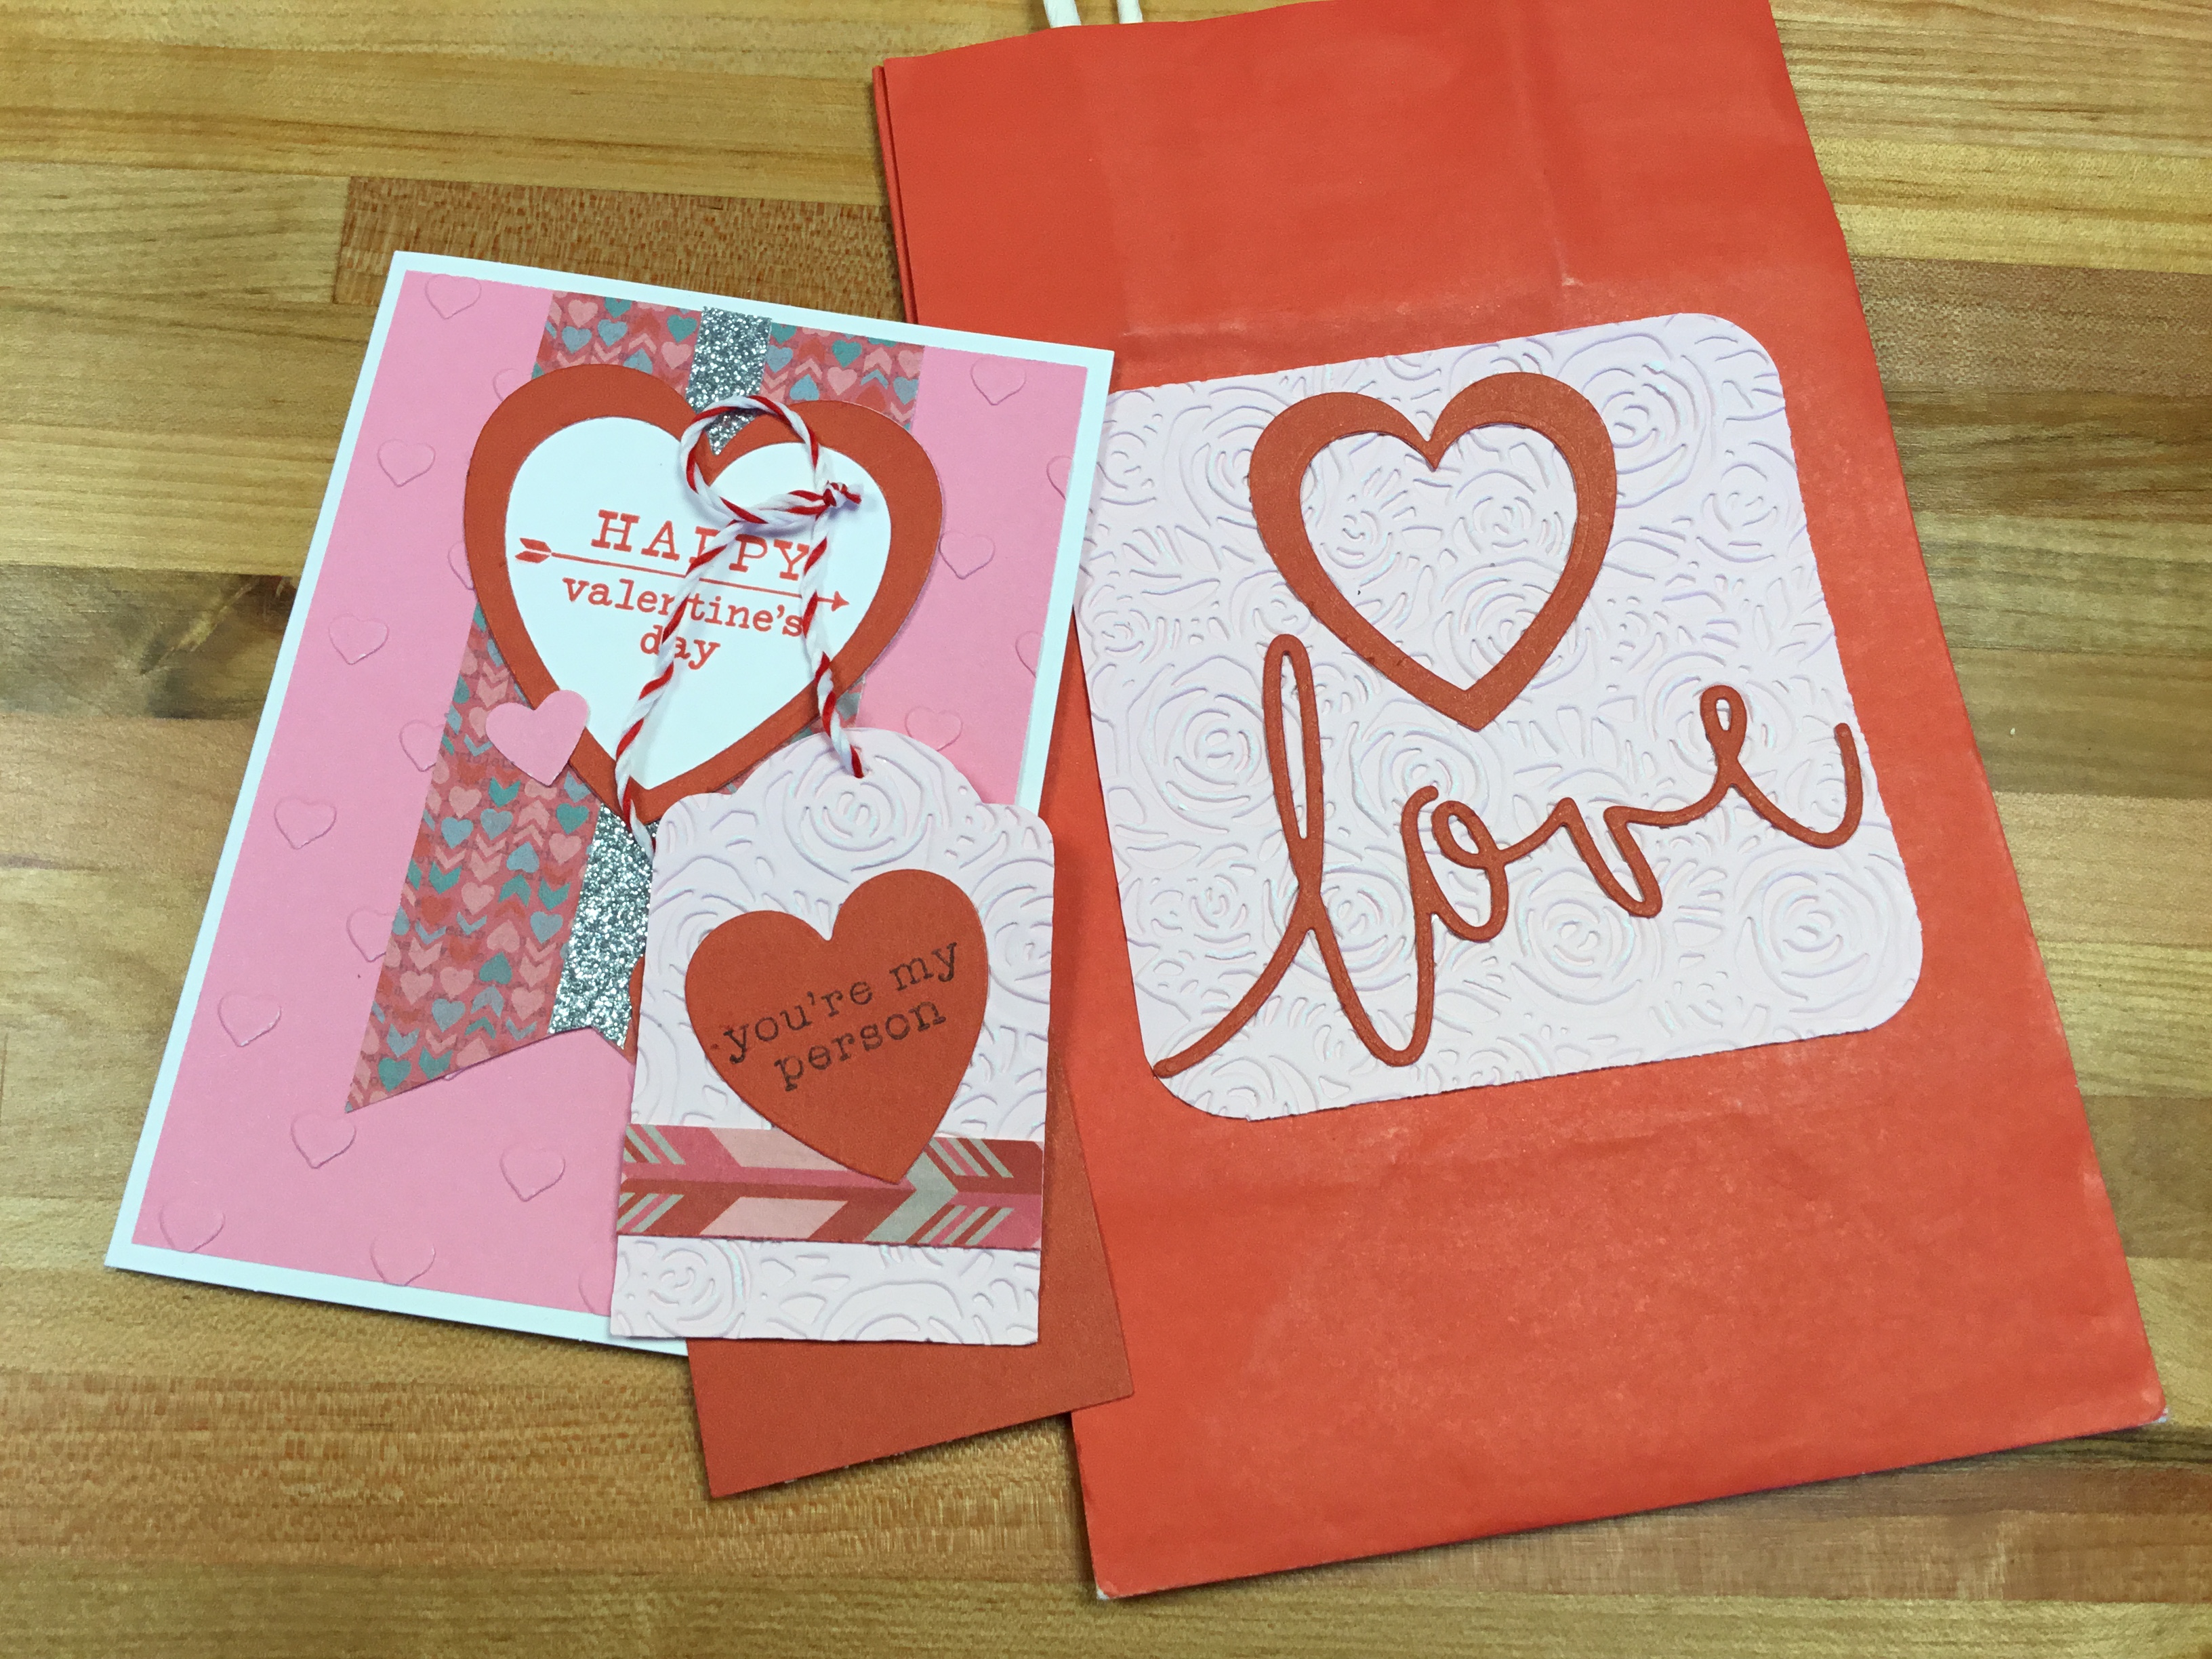 Photo of a Valentine's card, tag and gift bag